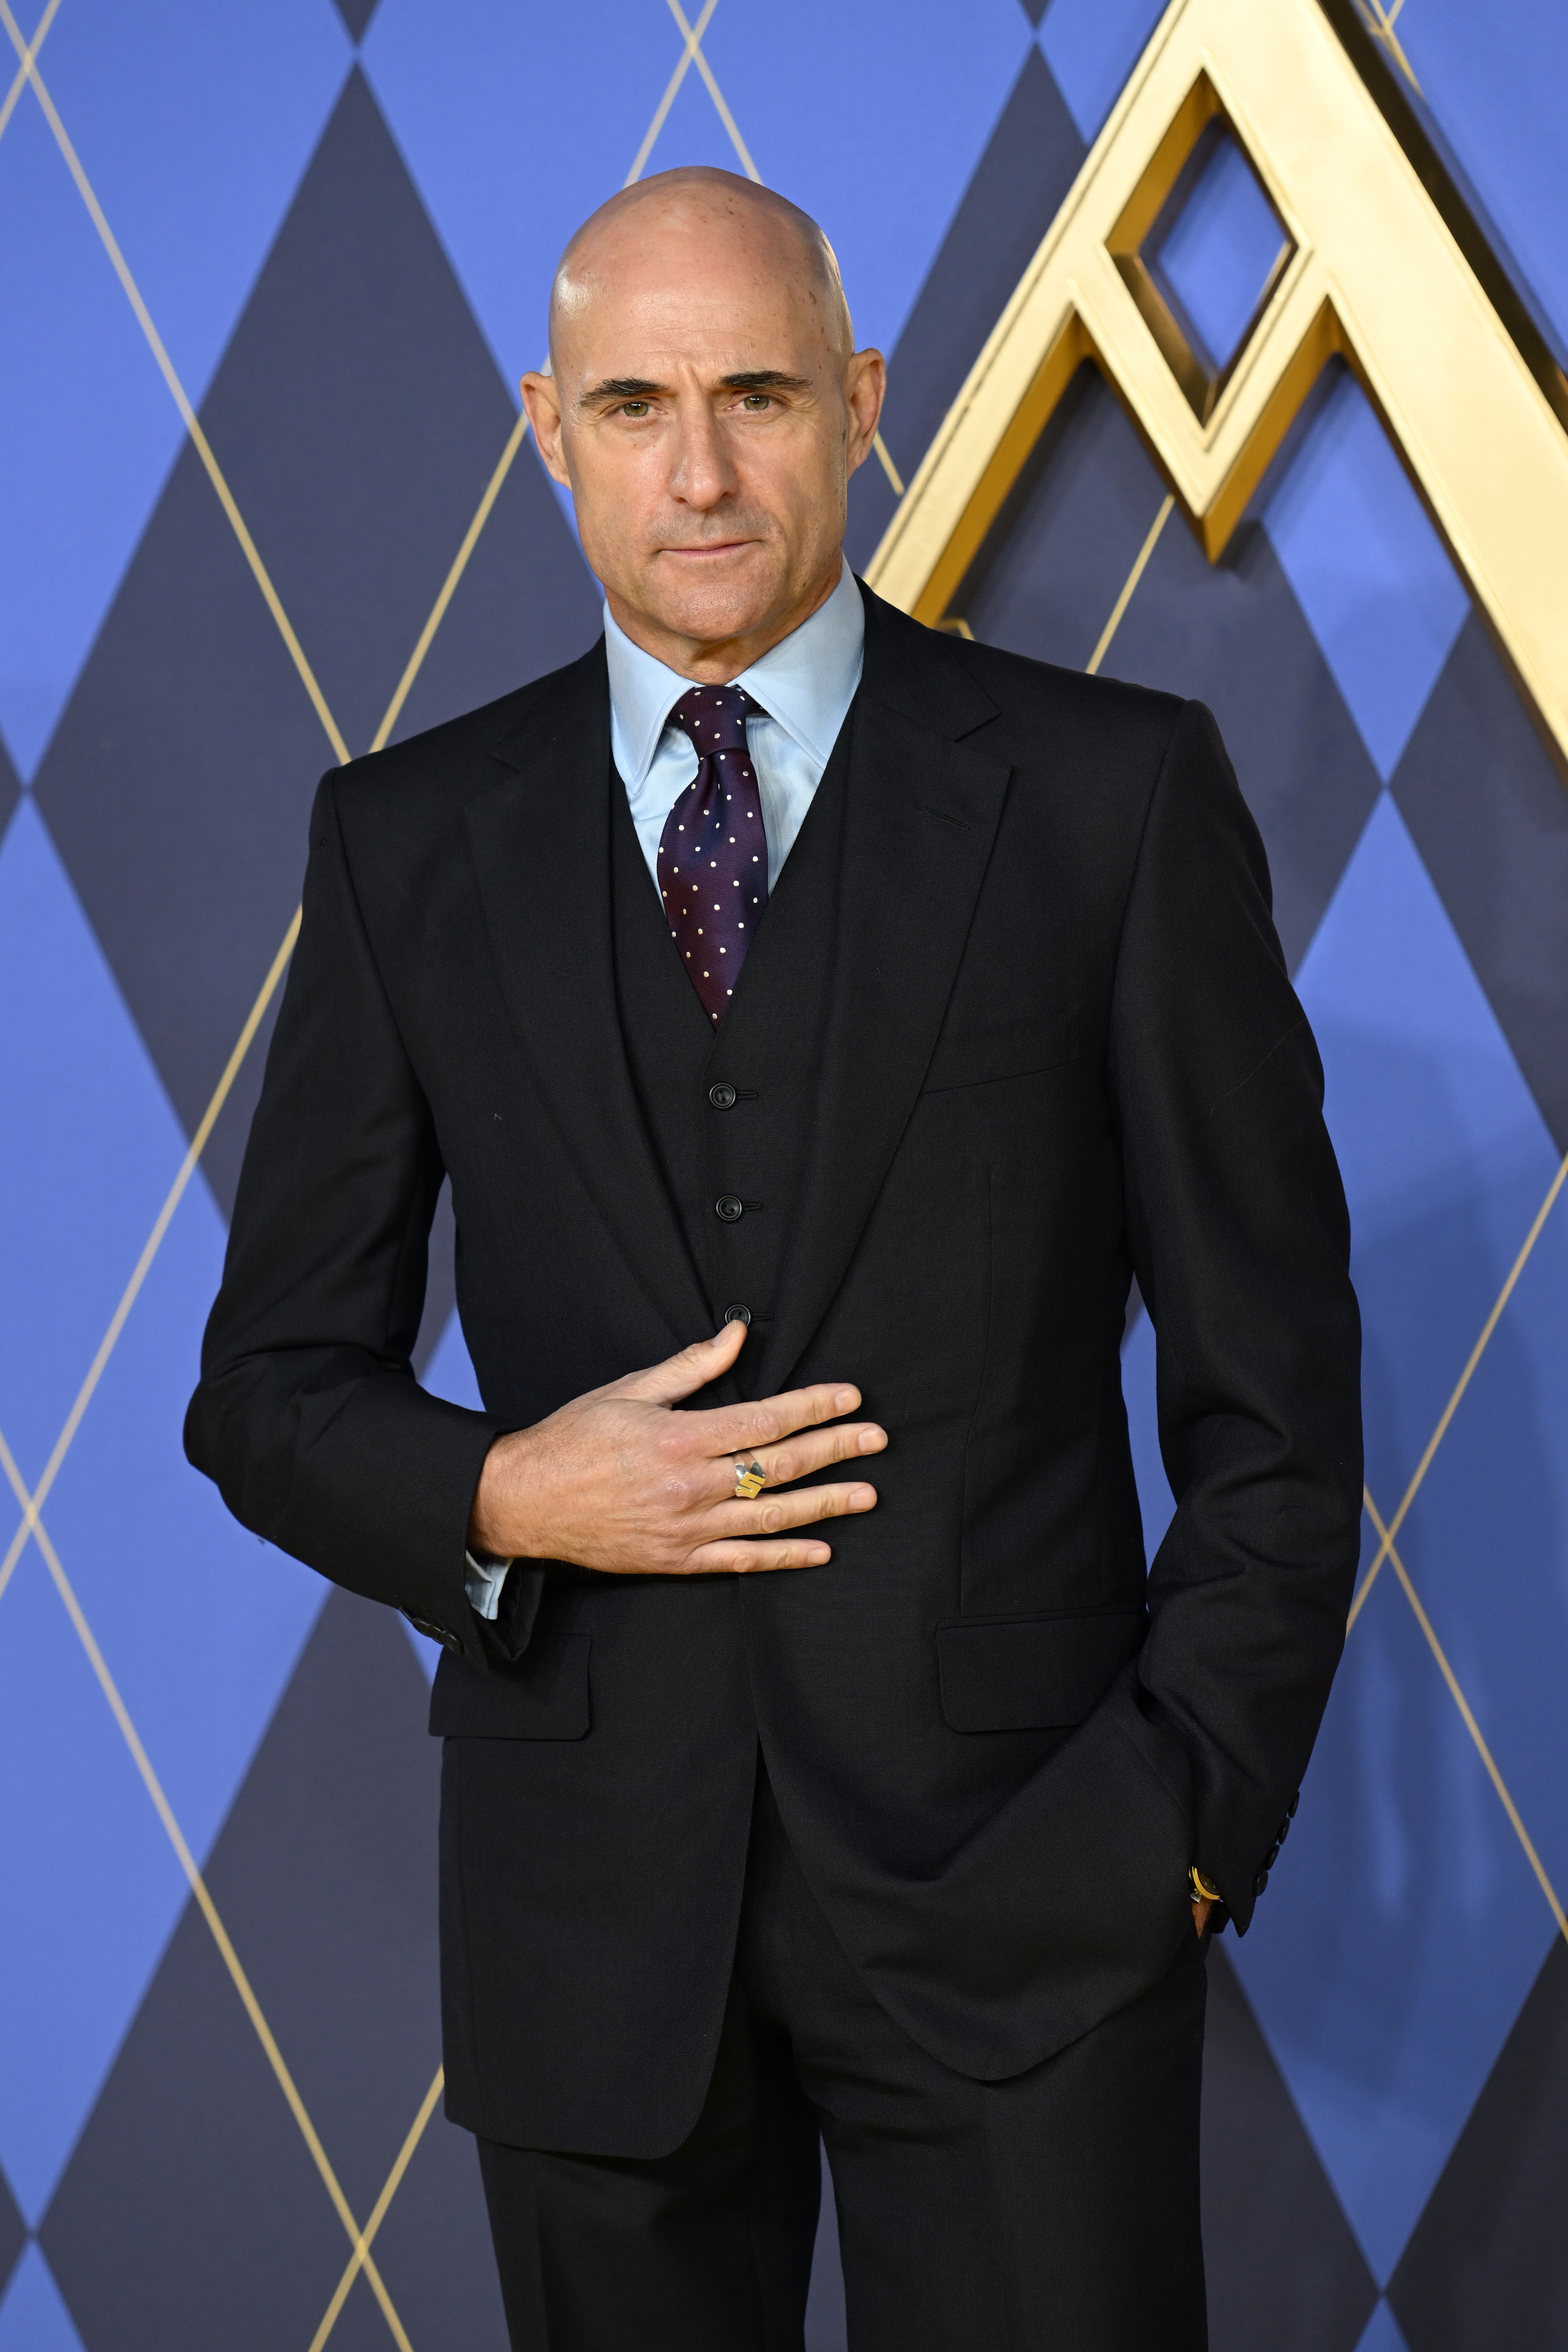 Mark Strong in a sharp suit posing confidently